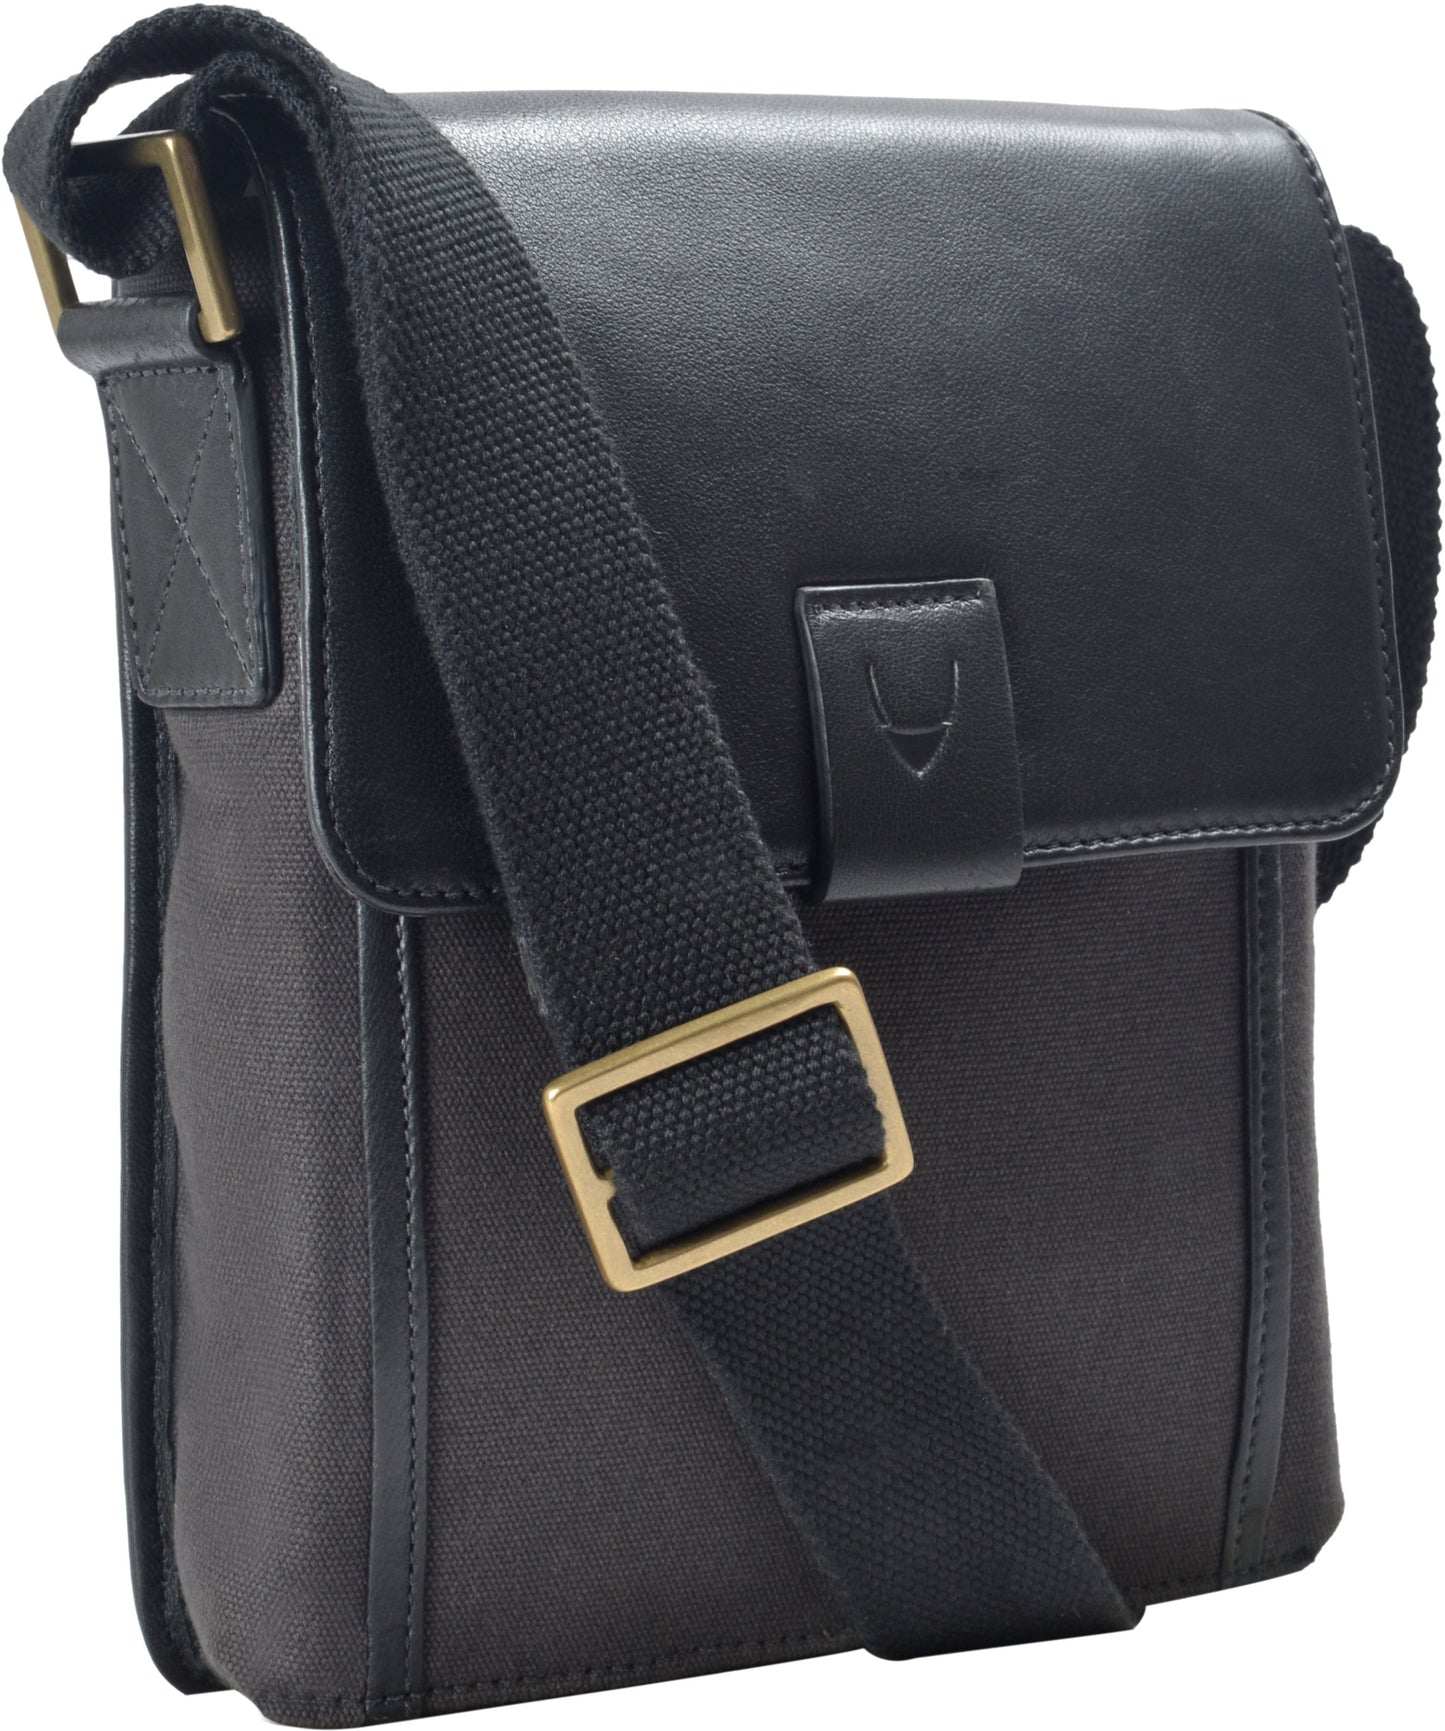 Aiden Small Canvas Leather Cross Body